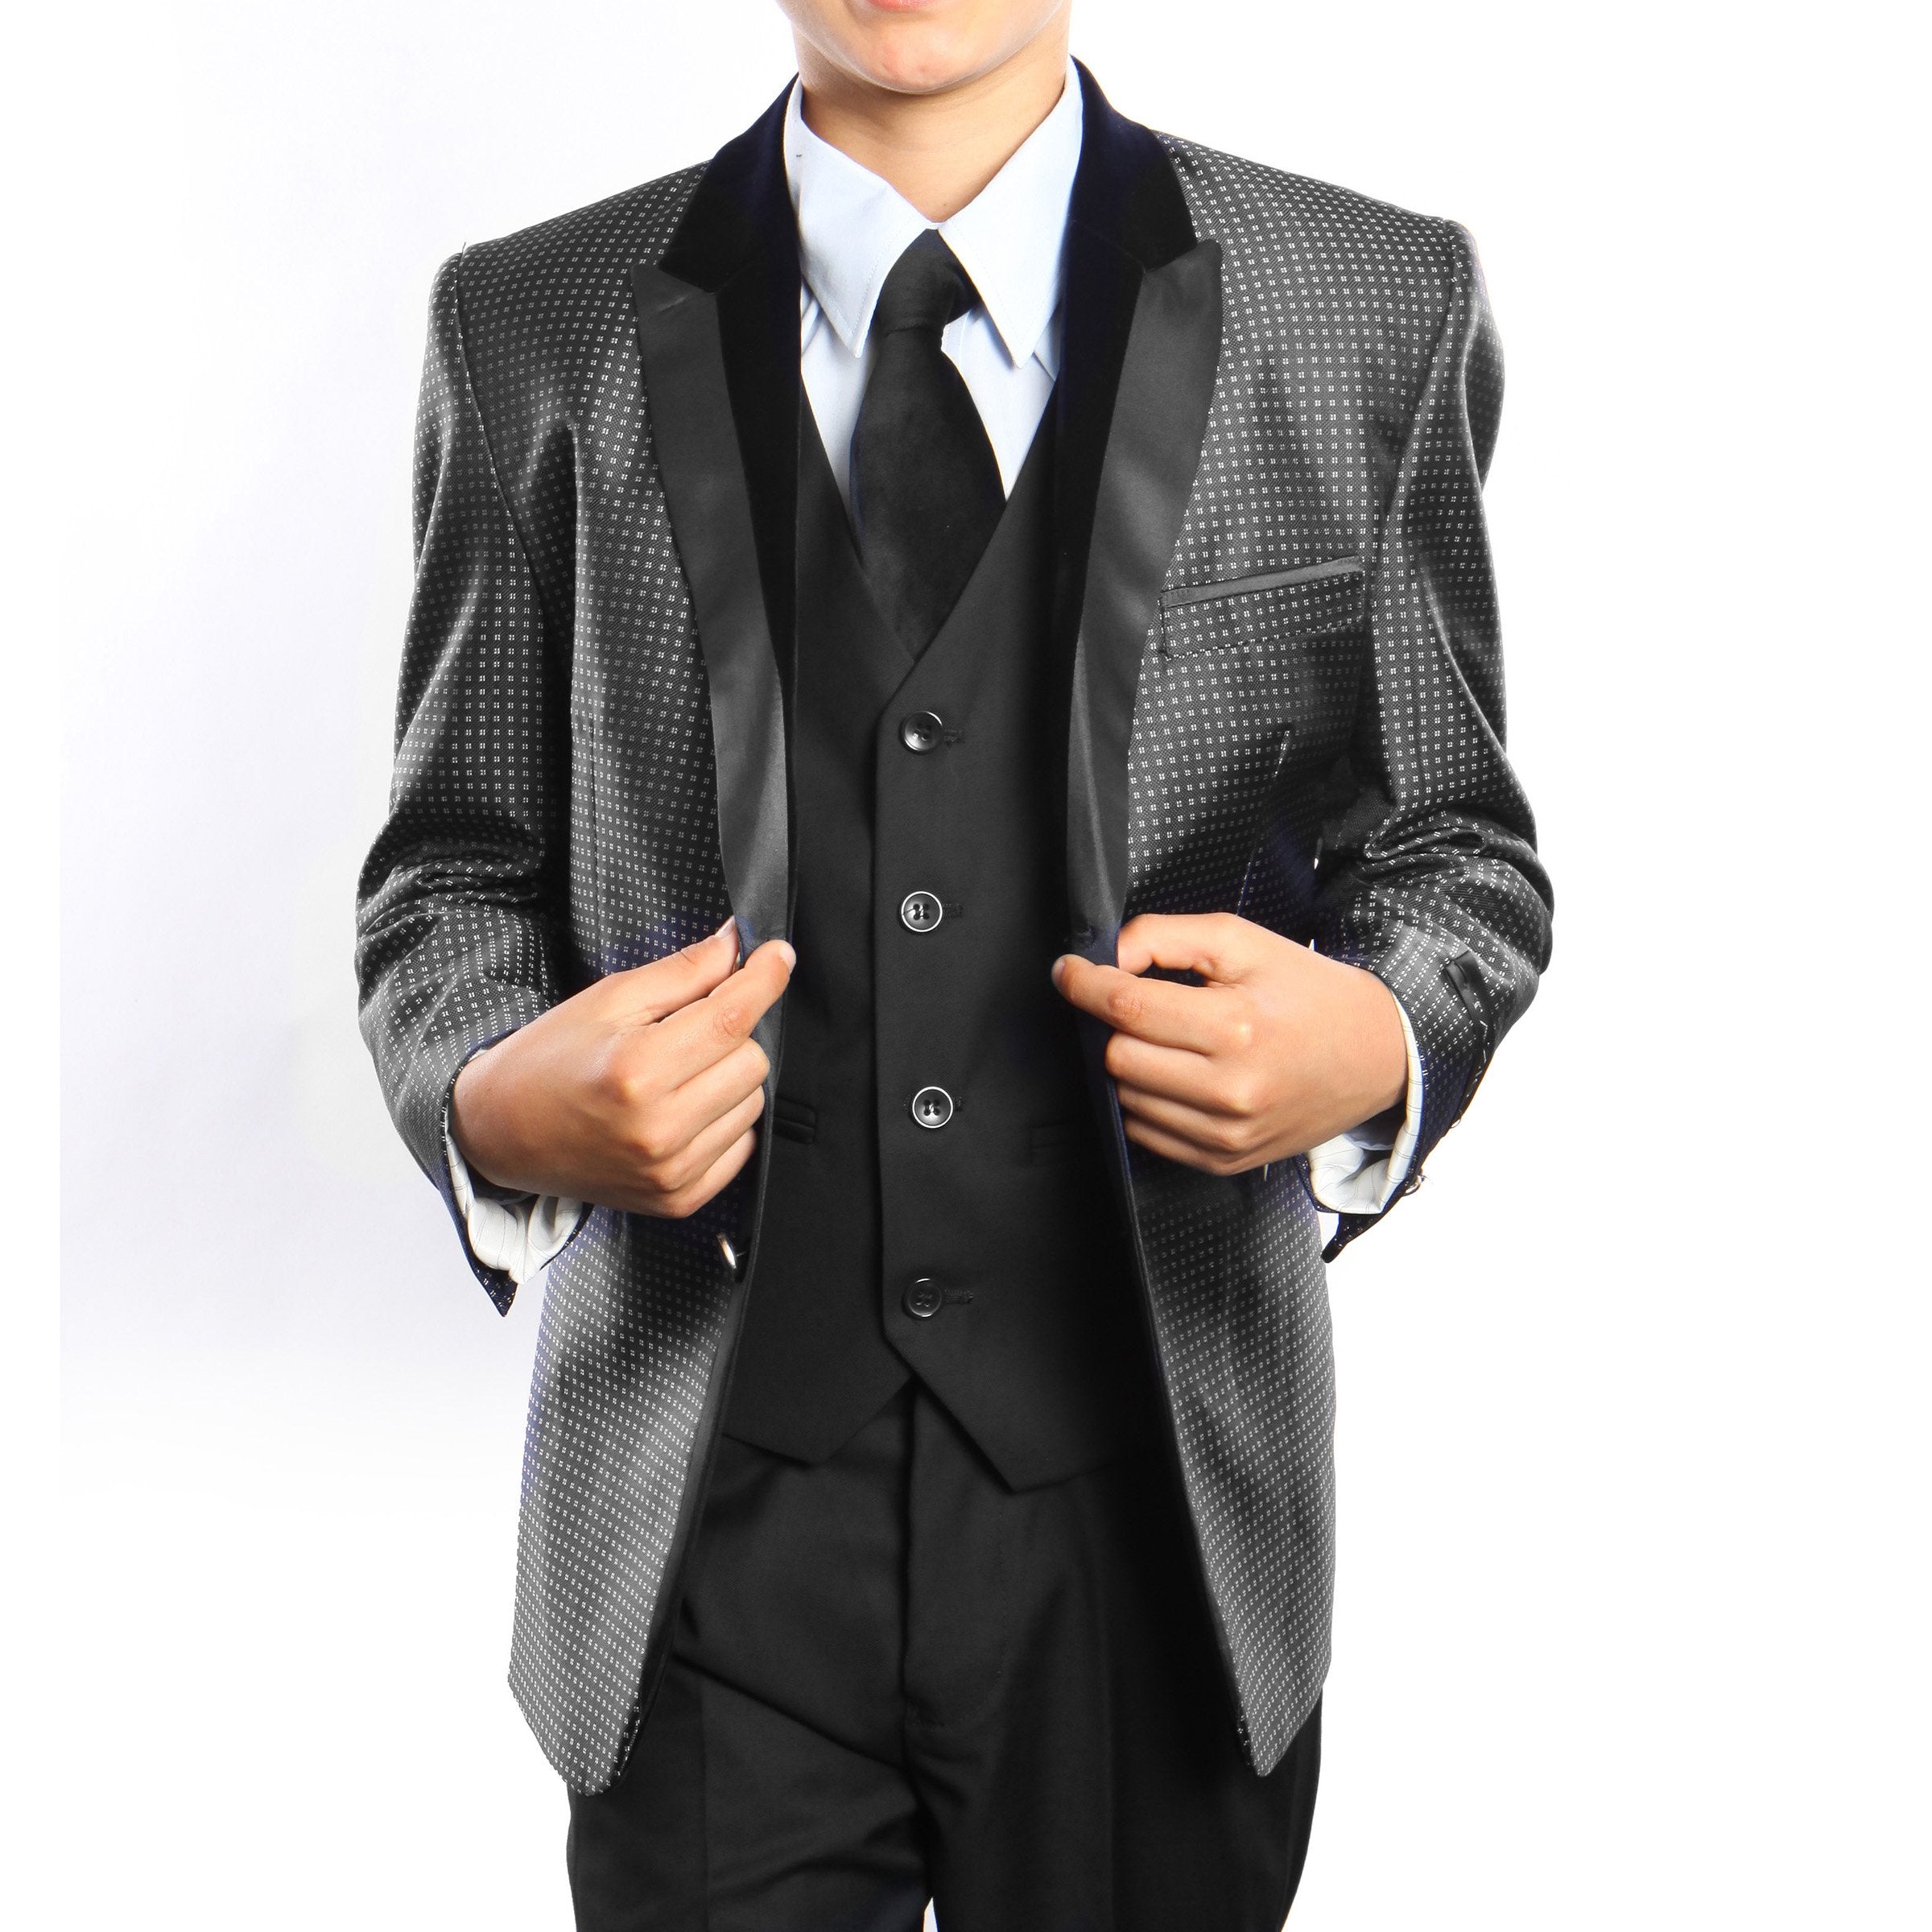 Micro Dot Pattern Suit With Shirt & Tie Suits For Boy's